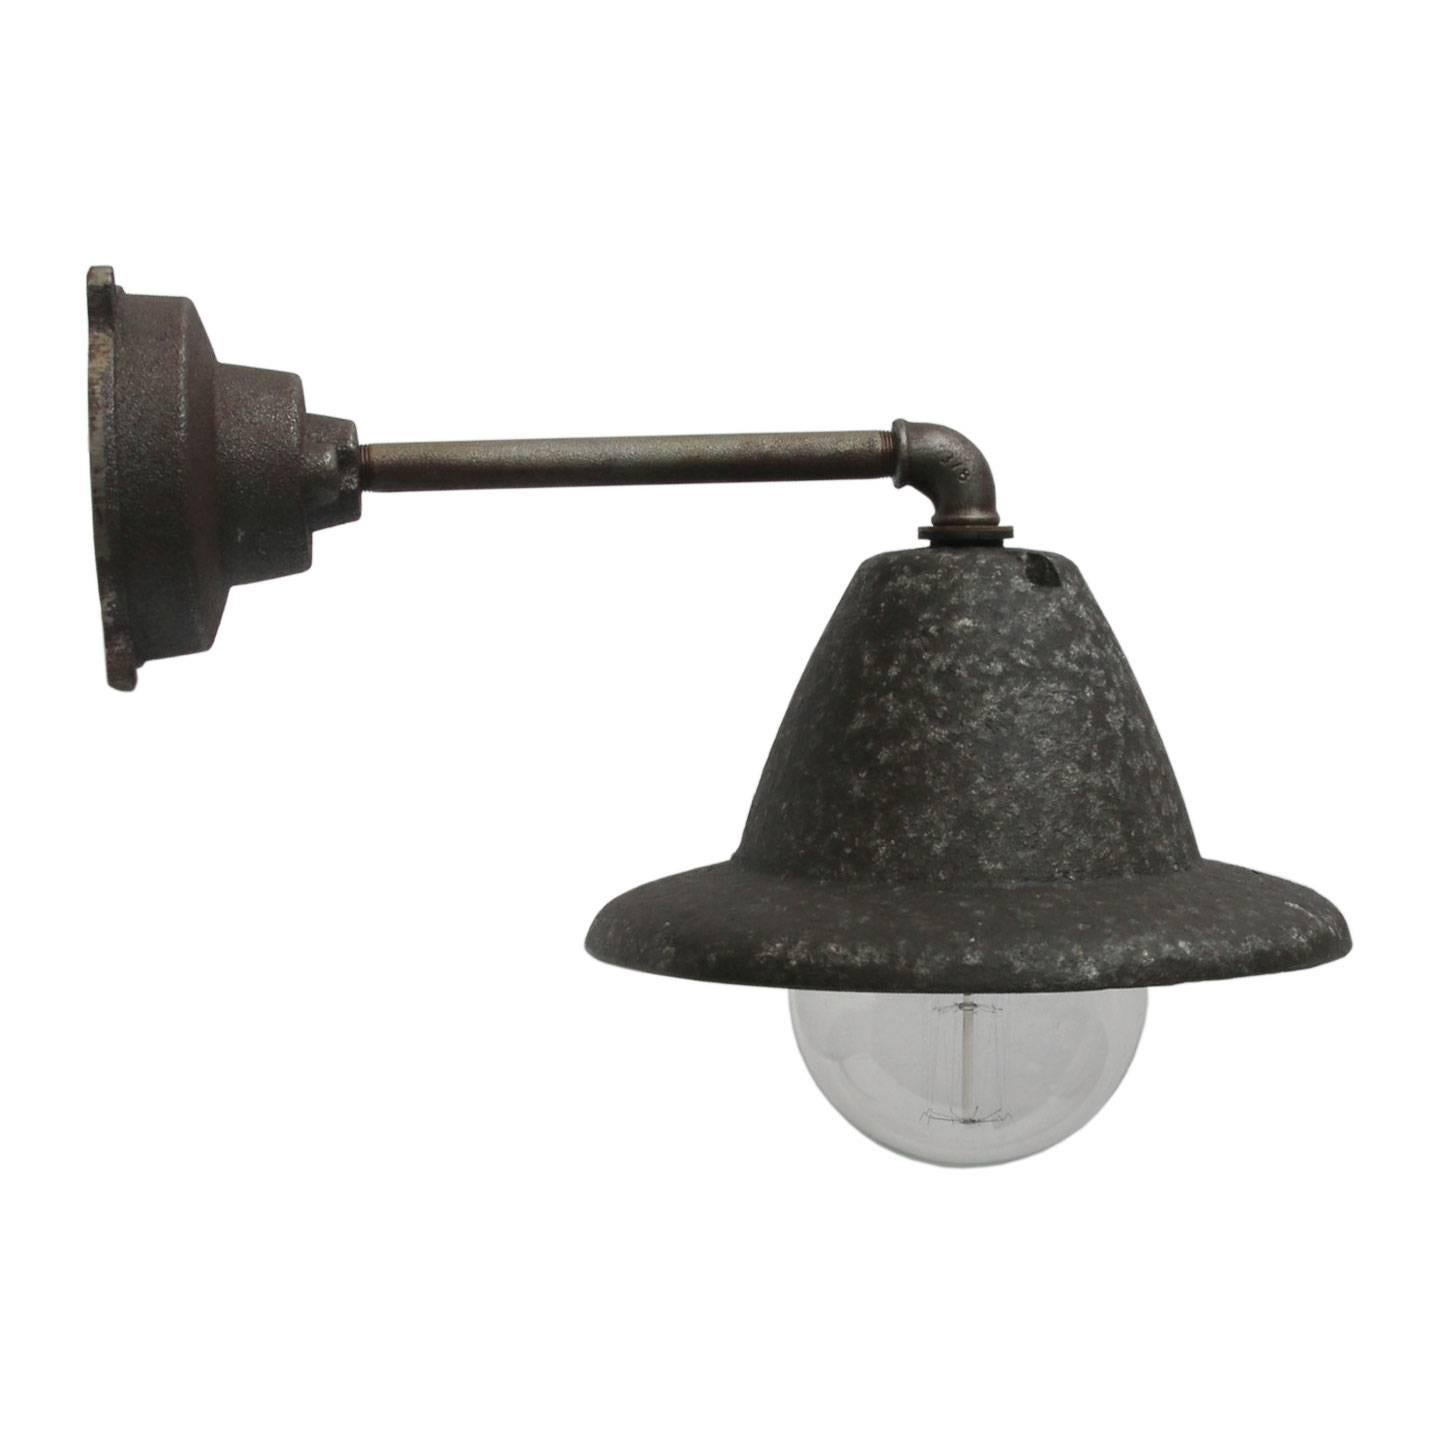 Factory wall light. Cast aluminium shade with cast iron wall arm.
Diameter cast iron wall piece: 12 cm, three holes to secure.

Weight: 2.8 kg / 6.2 lb

All lamps have been made suitable by international standards for incandescent light bulbs,